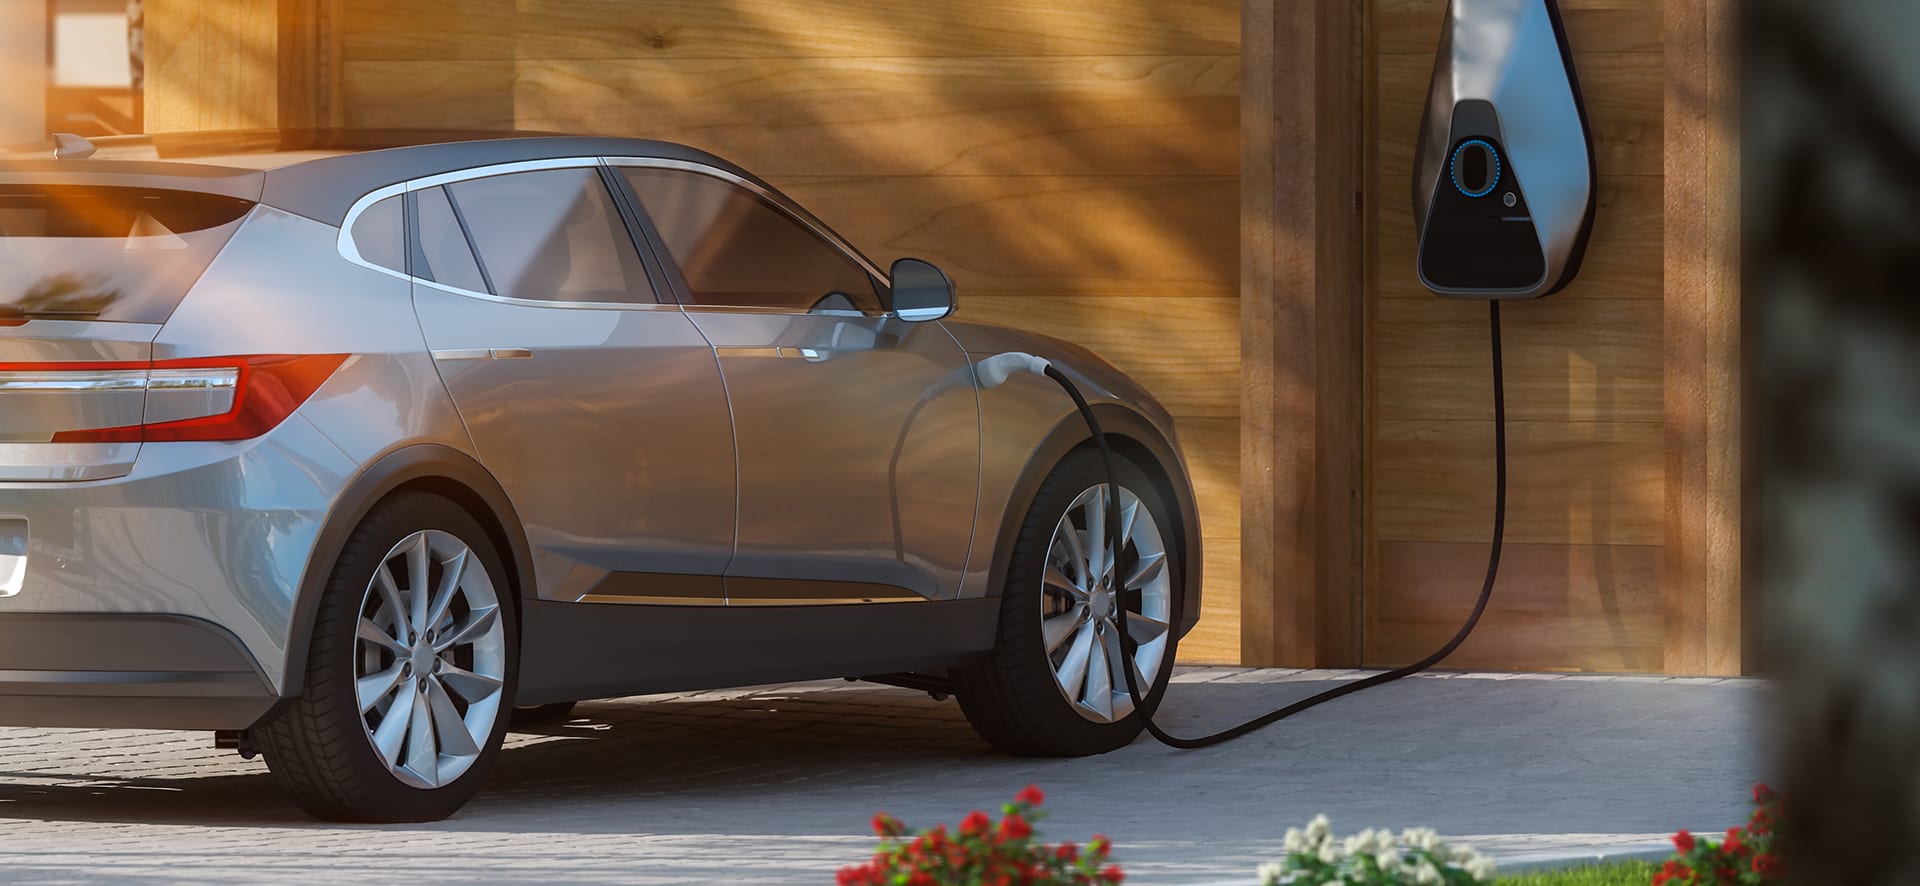 A sleek electric vehicles plugged into a home charging station